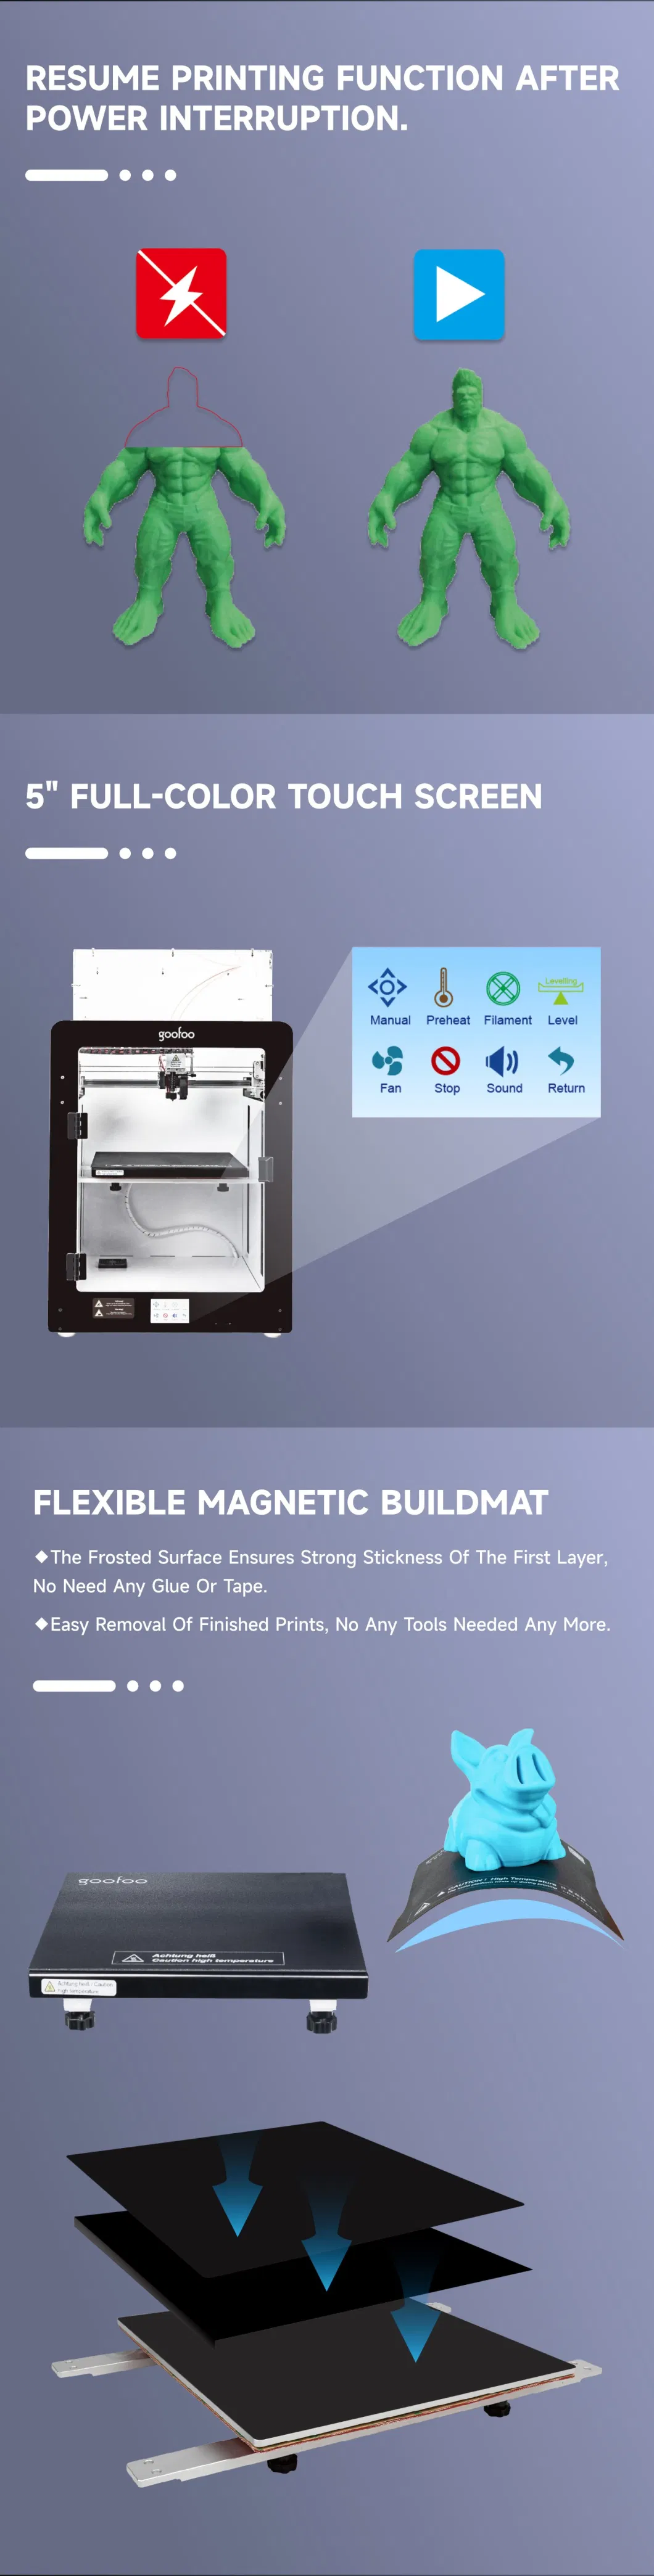 Professional 3D Printer with WiFi Function, High Precision Printing with Engineering Filament